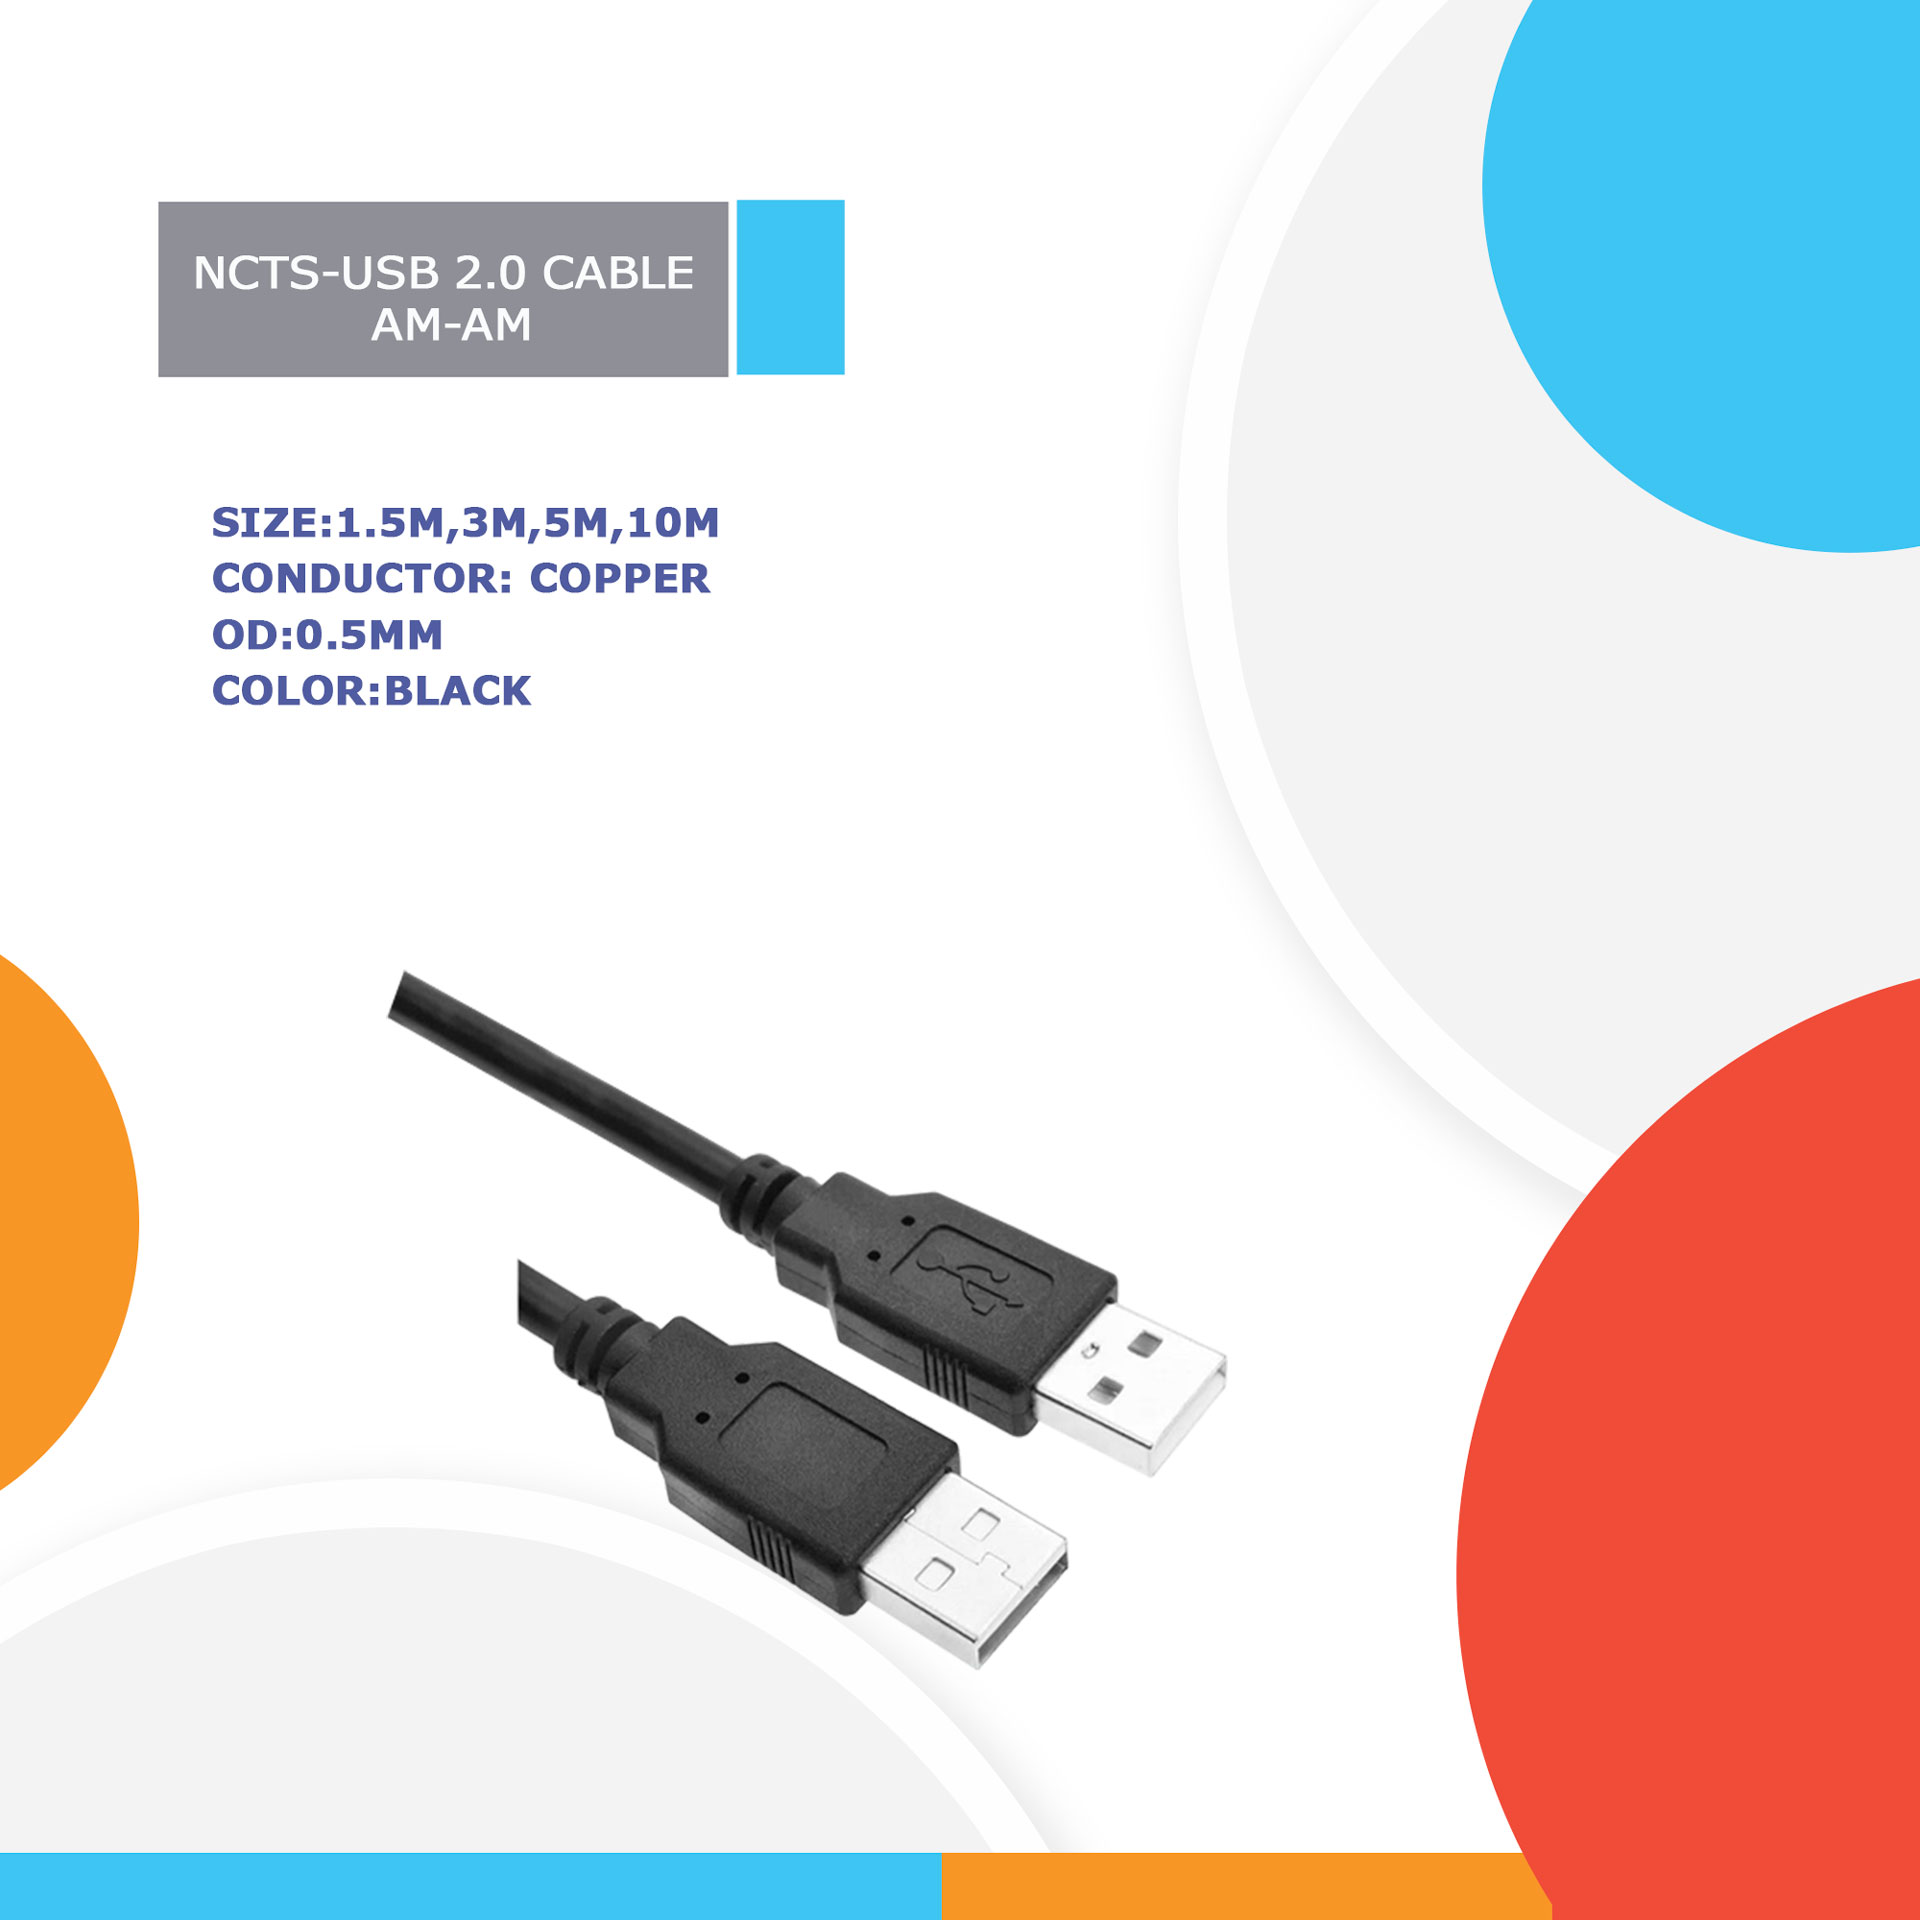 NCTS USB 2.0 CABLE AM-AM